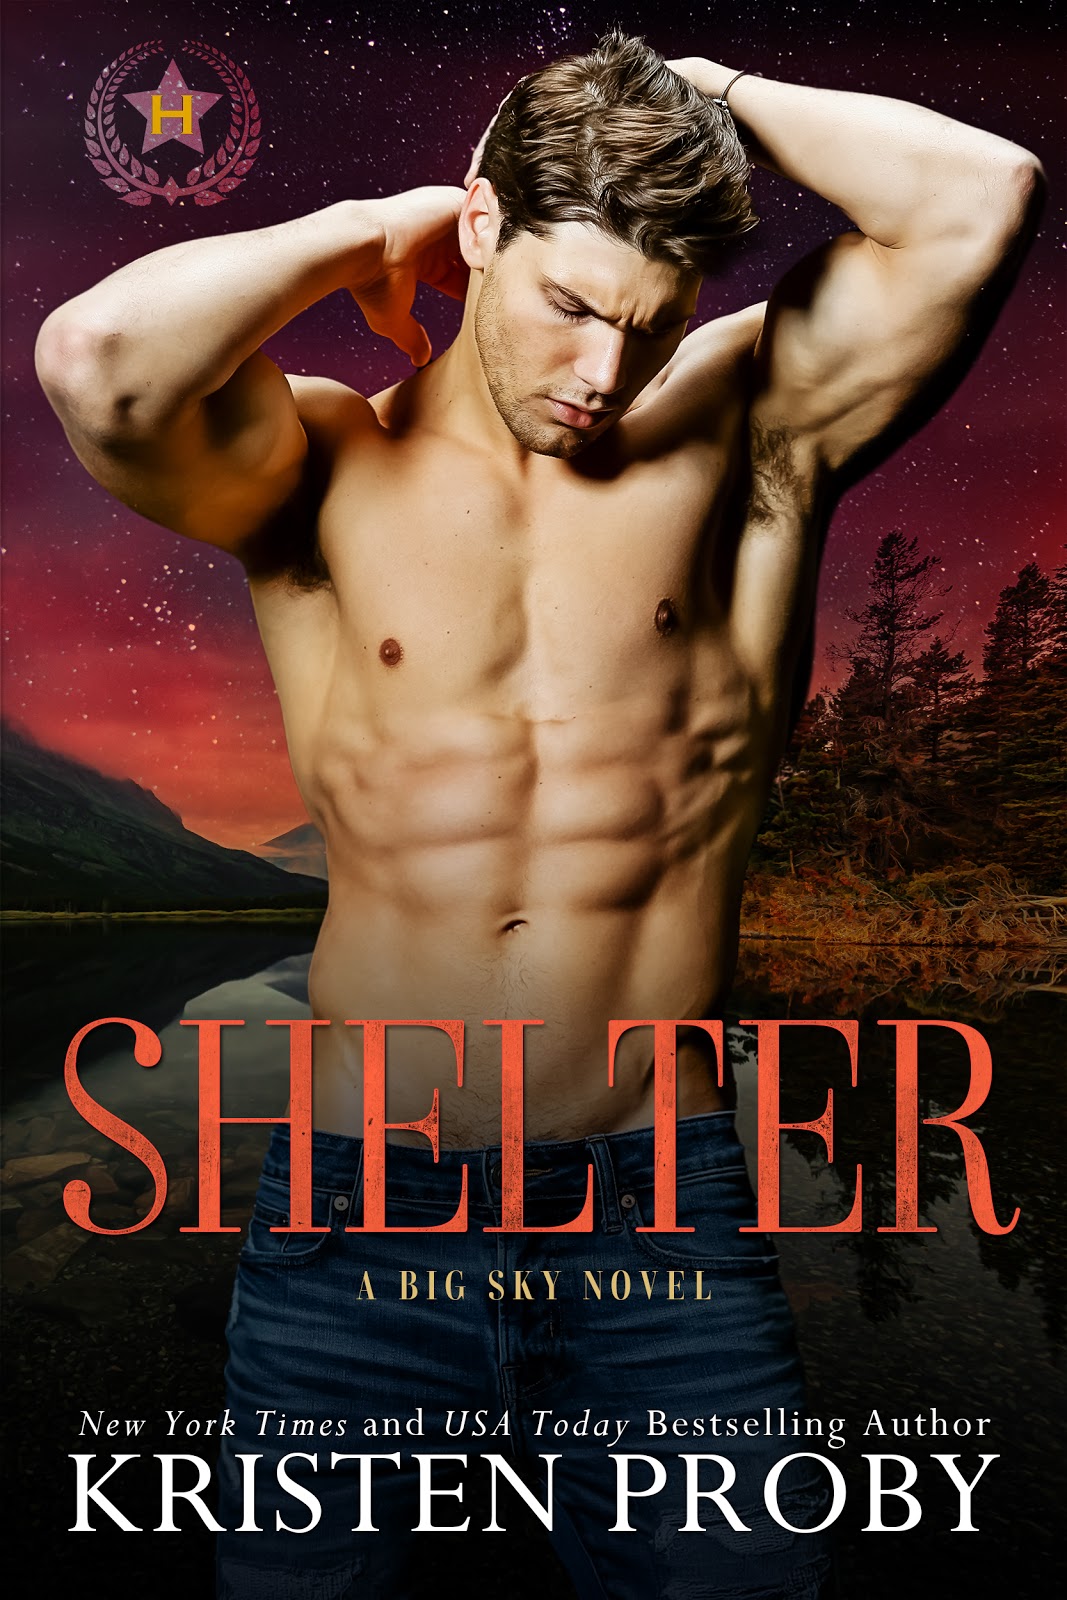 Shelter by Kristen Proby ❤️